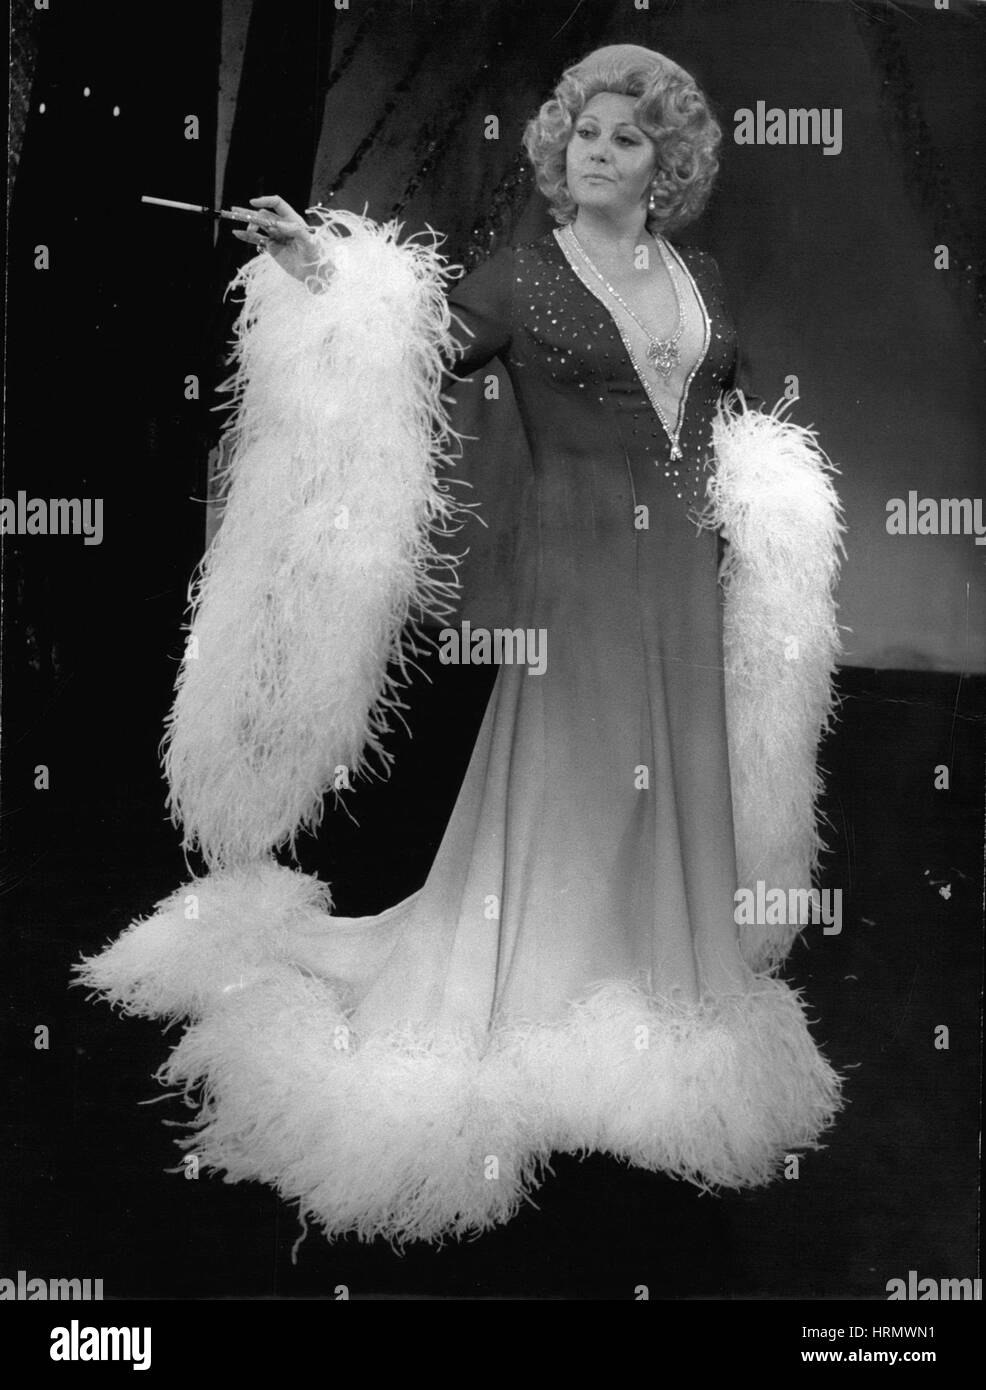 Jan. 11, 1974 - Bernard Gavoty asked Regine Crespin to be his guest for the traditional get-togethers held at the Royal Palace during the month of January. She will be surrounded by Jacques Martin, Madame Soleil, and Raymond Olivier. Regine Crepin is pictured here wearing a 1930s gown, a white boa, a blonde wig, and carrying an immense cigarette holder. (Credit Image: © Keystone Press Agency/Keystone USA via ZUMAPRESS.com) Stock Photo